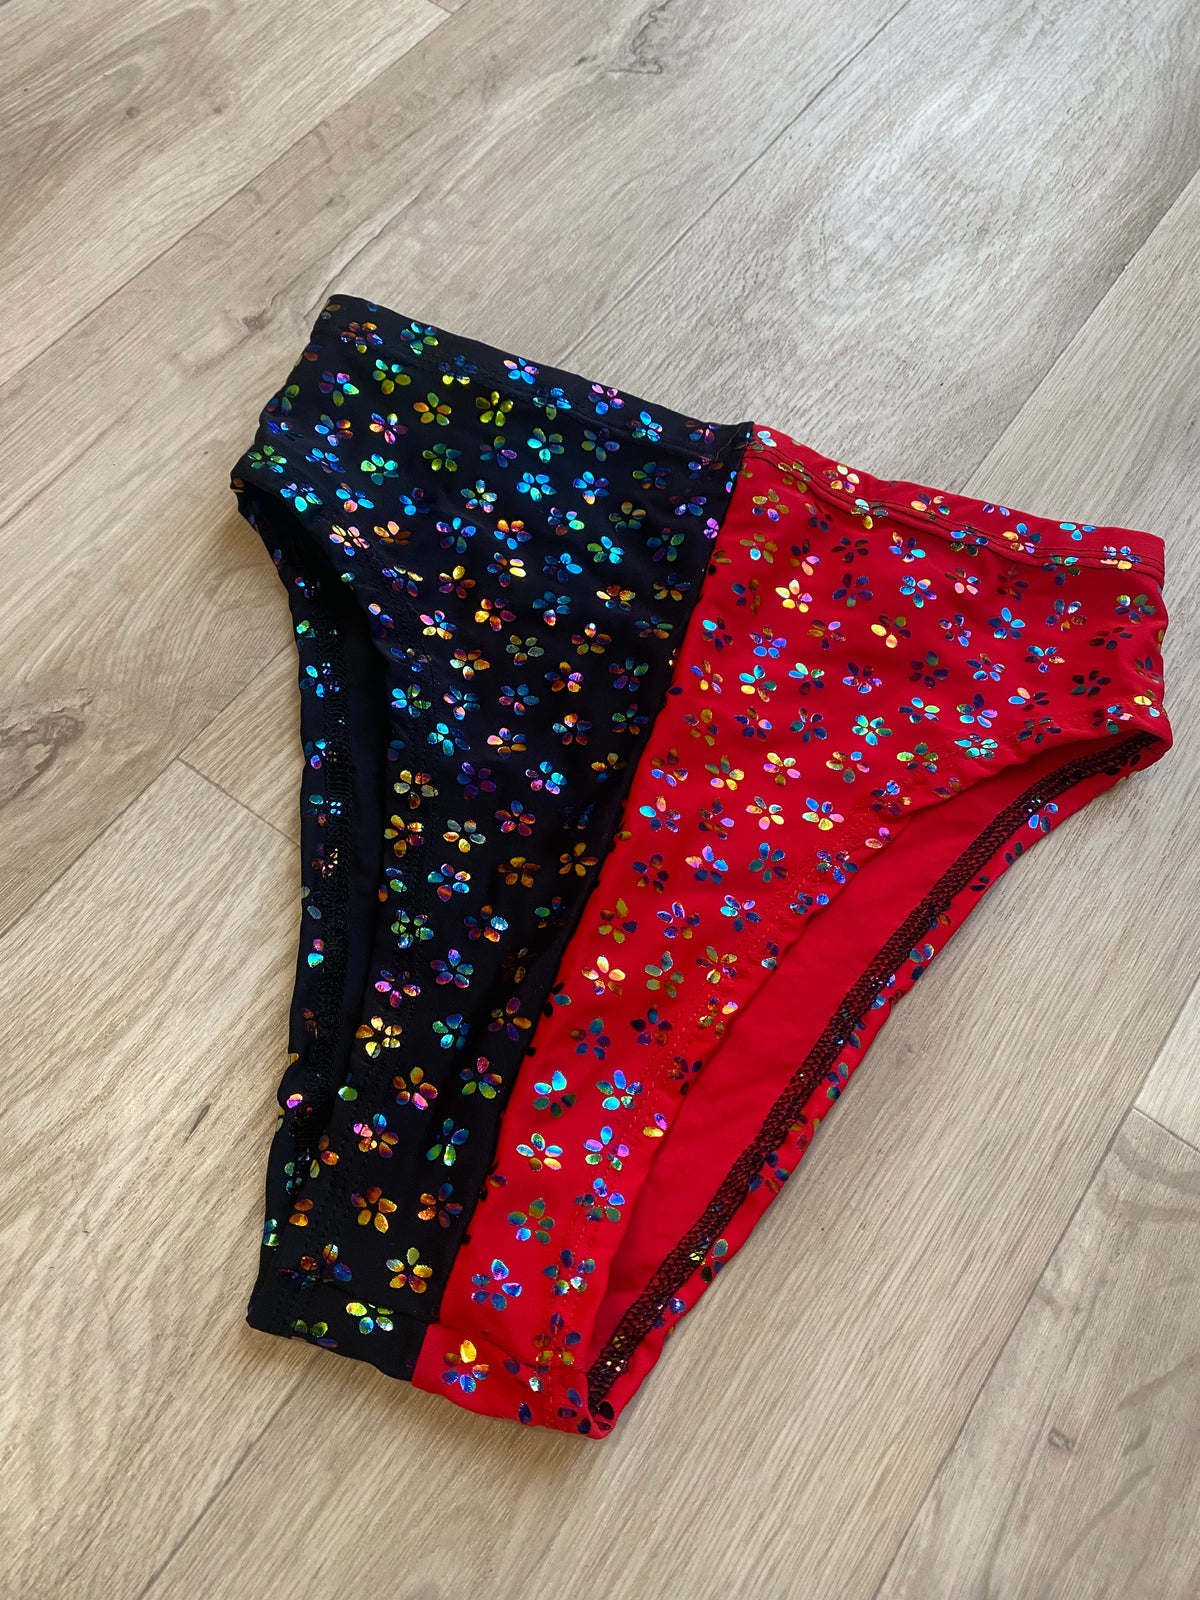 BLACK AND RED GYPSY  SPLIT HIGH CUT BOTTOMS SIZE UK 8/US 4 SAMPLE SALE